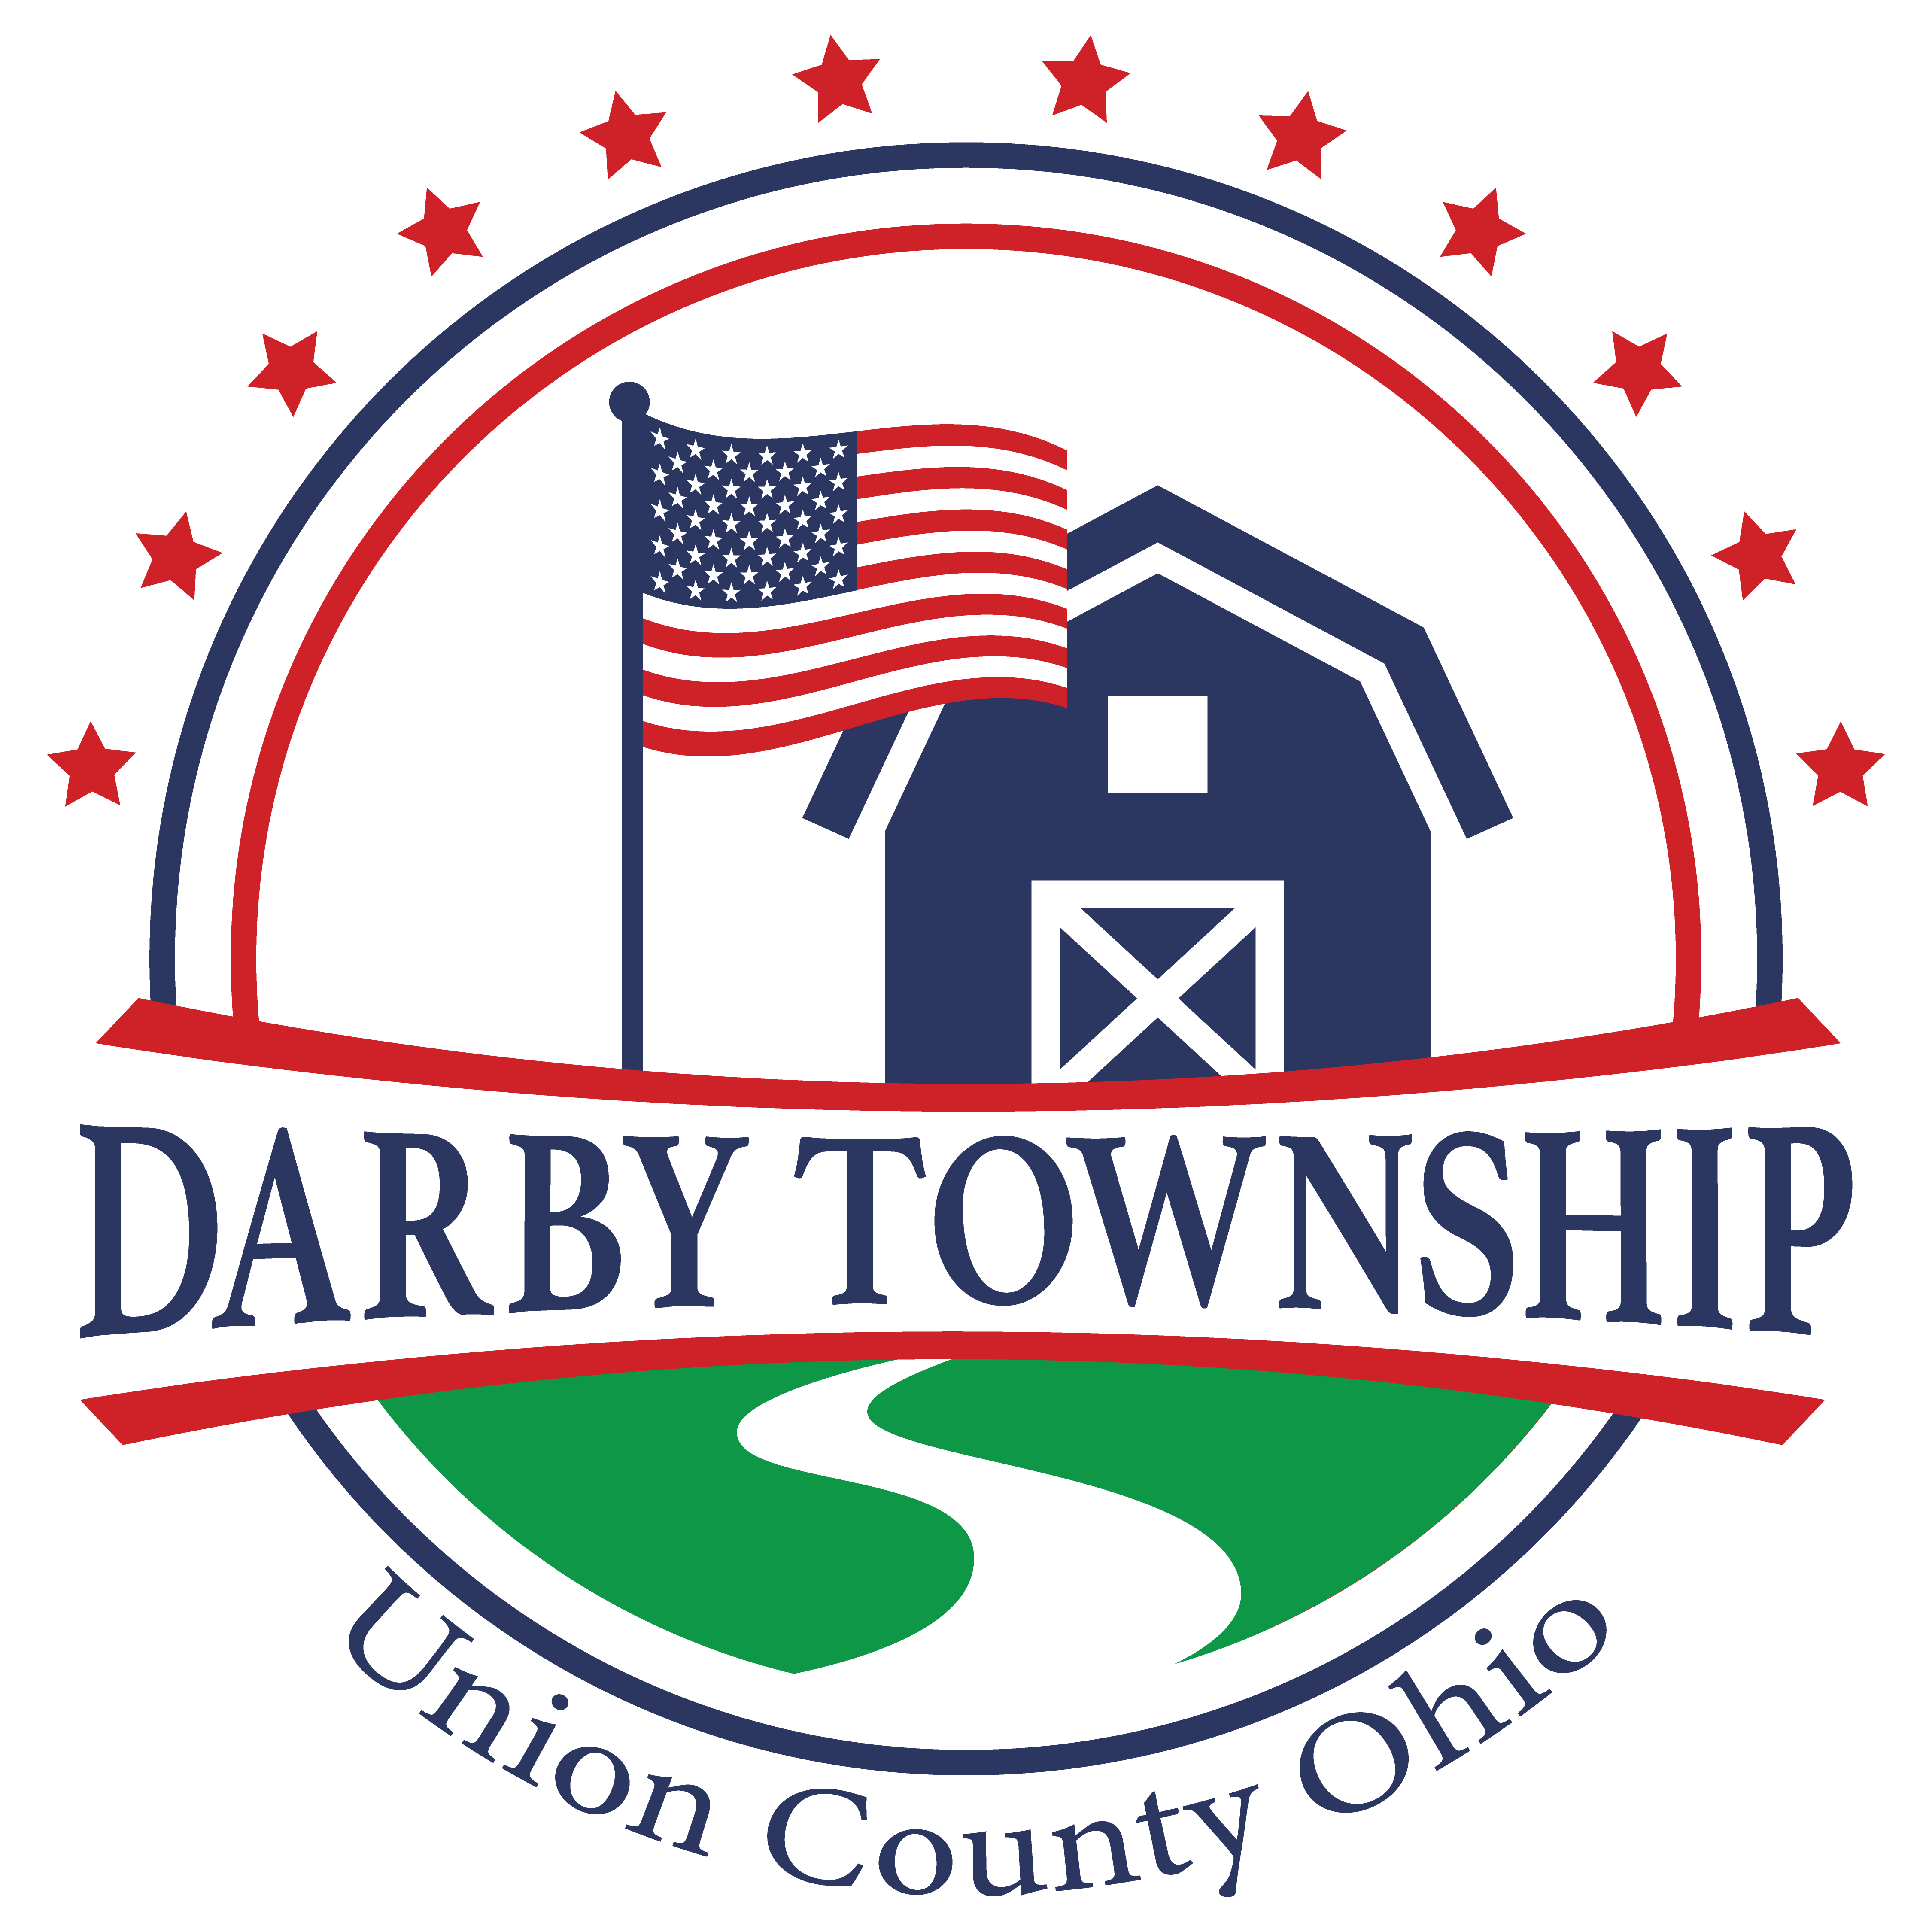 Darby Township